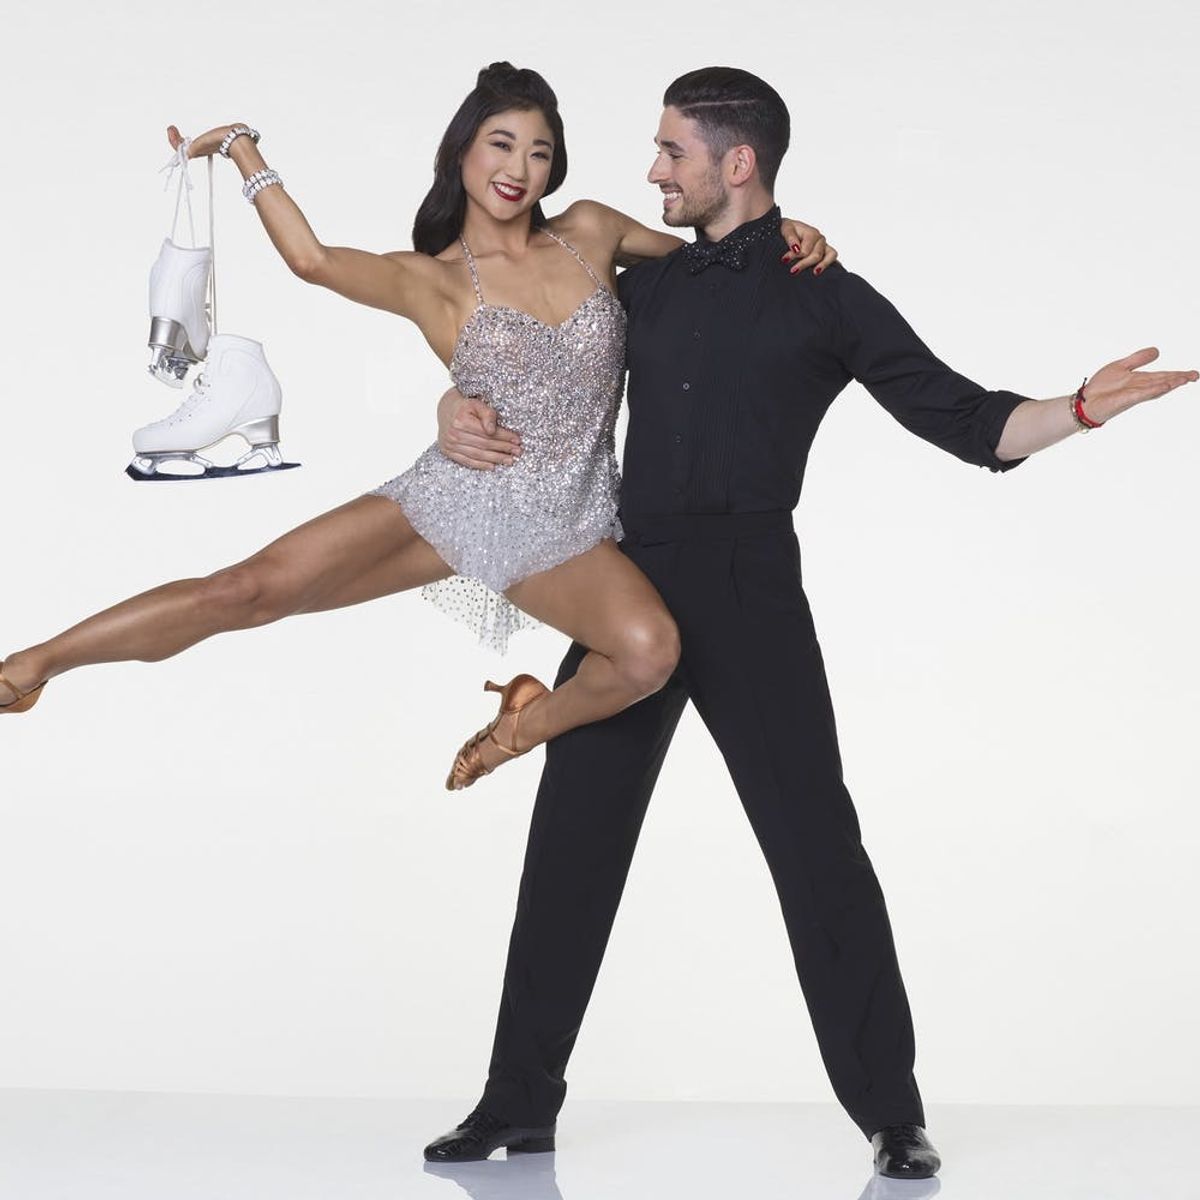 See the Entire ‘Dancing With the Stars: Athletes’ Cast With Their Partners!